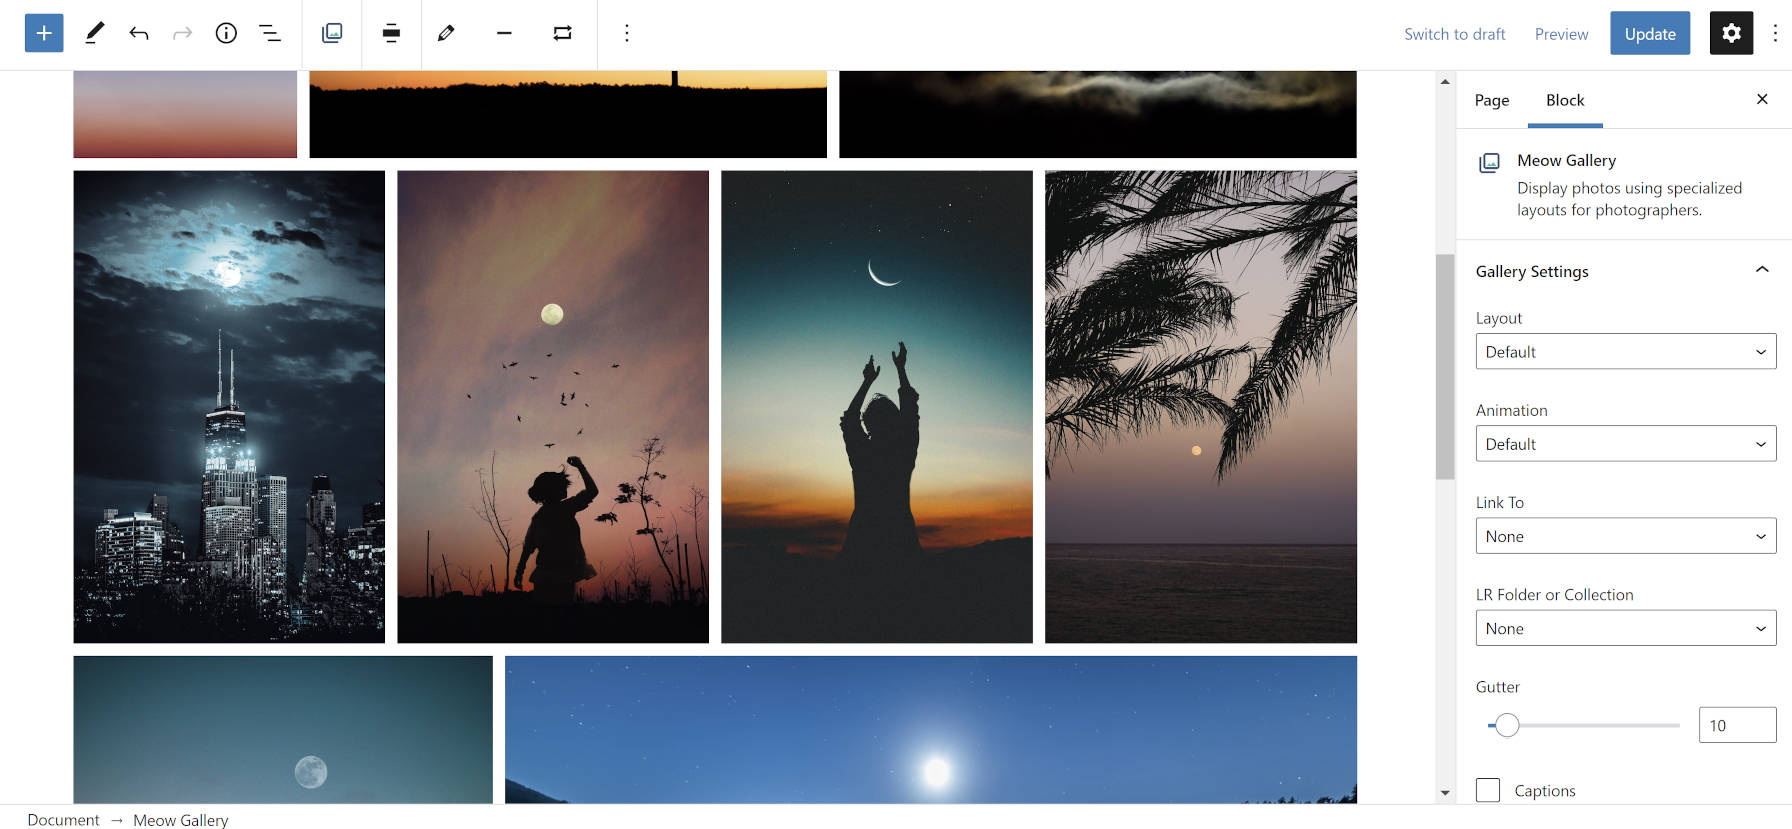 Tiled image gallery using the Meow Gallery plugin.